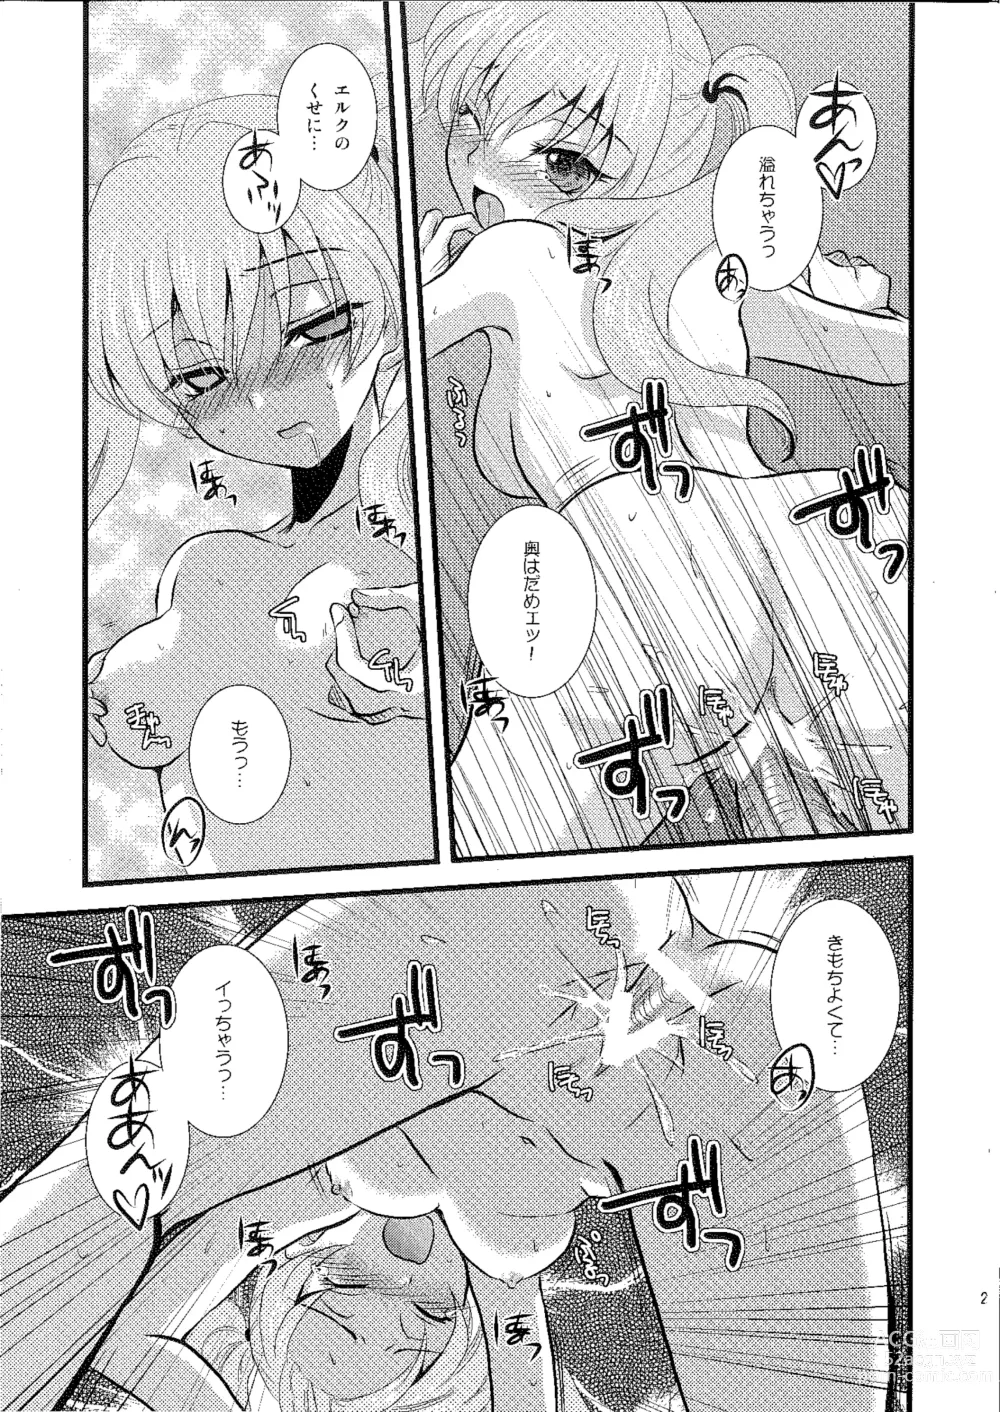 Page 18 of doujinshi Permeation